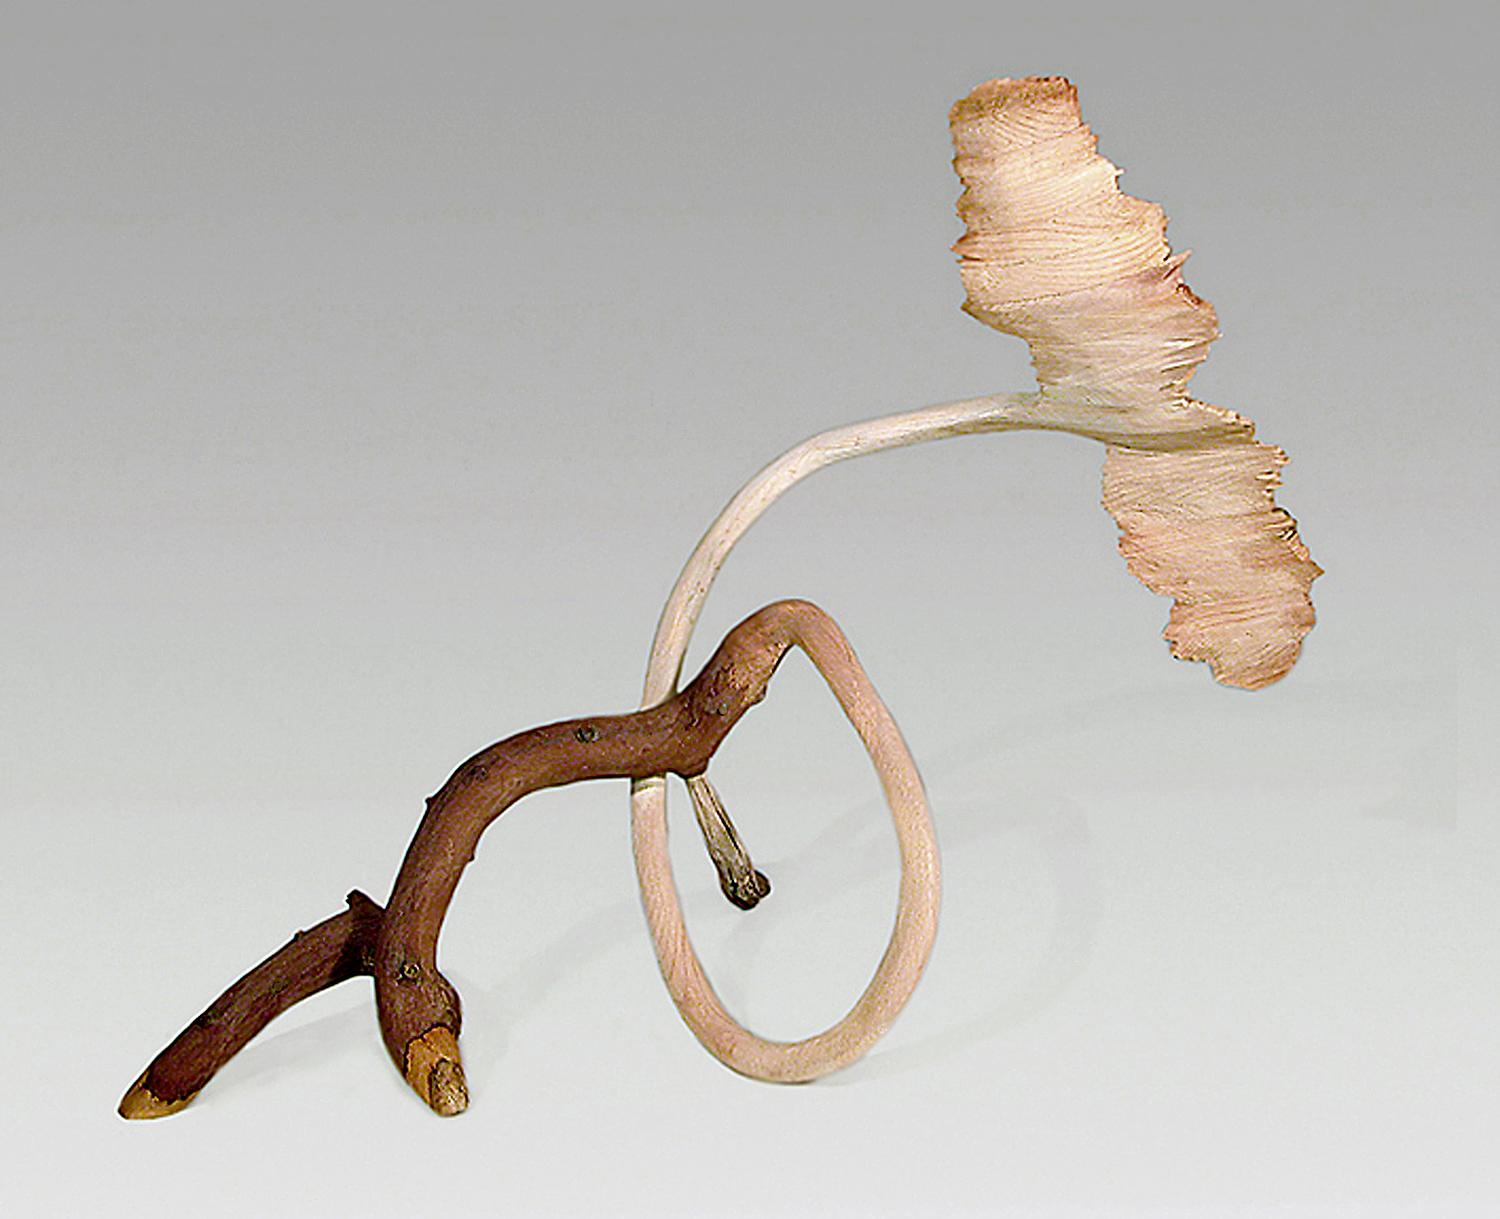 Jeff Key Abstract Sculpture - "Course" abstract wood sculpture